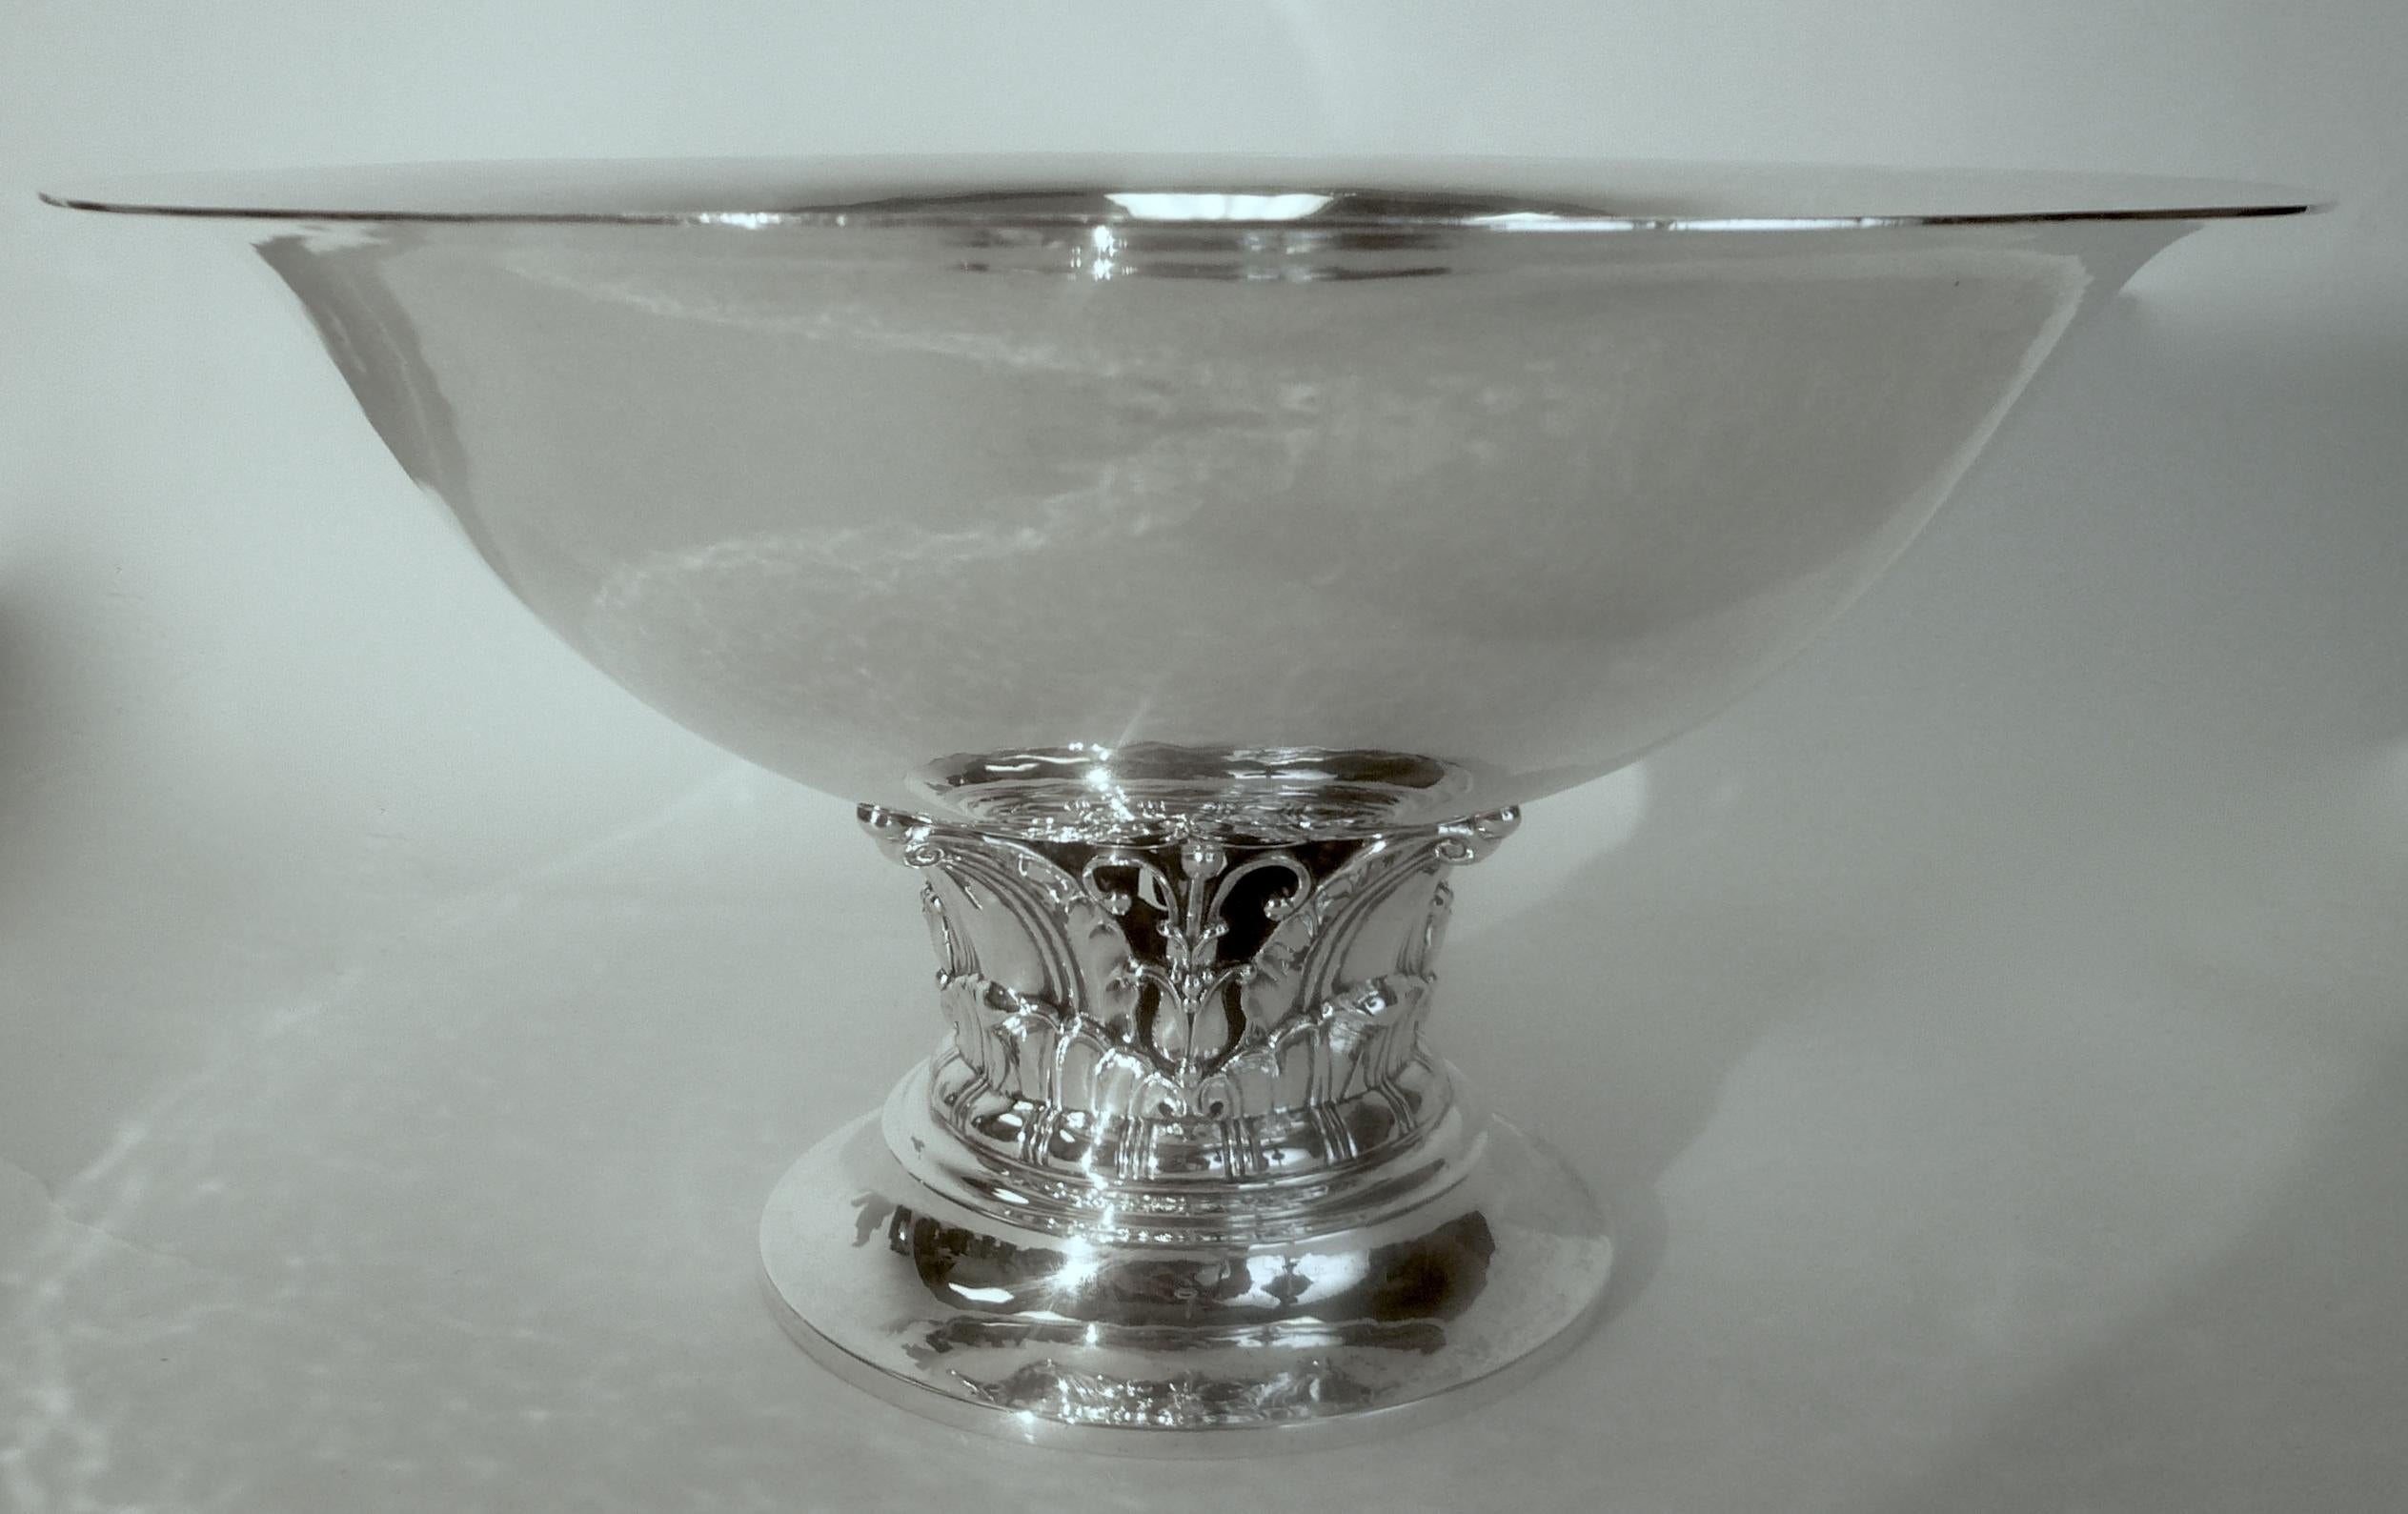 This beautifully handcrafted Georg Jensen Danish style centre bowl features a pierced foliate design support on a stepped base. The weight is 36.5 troy ounces.